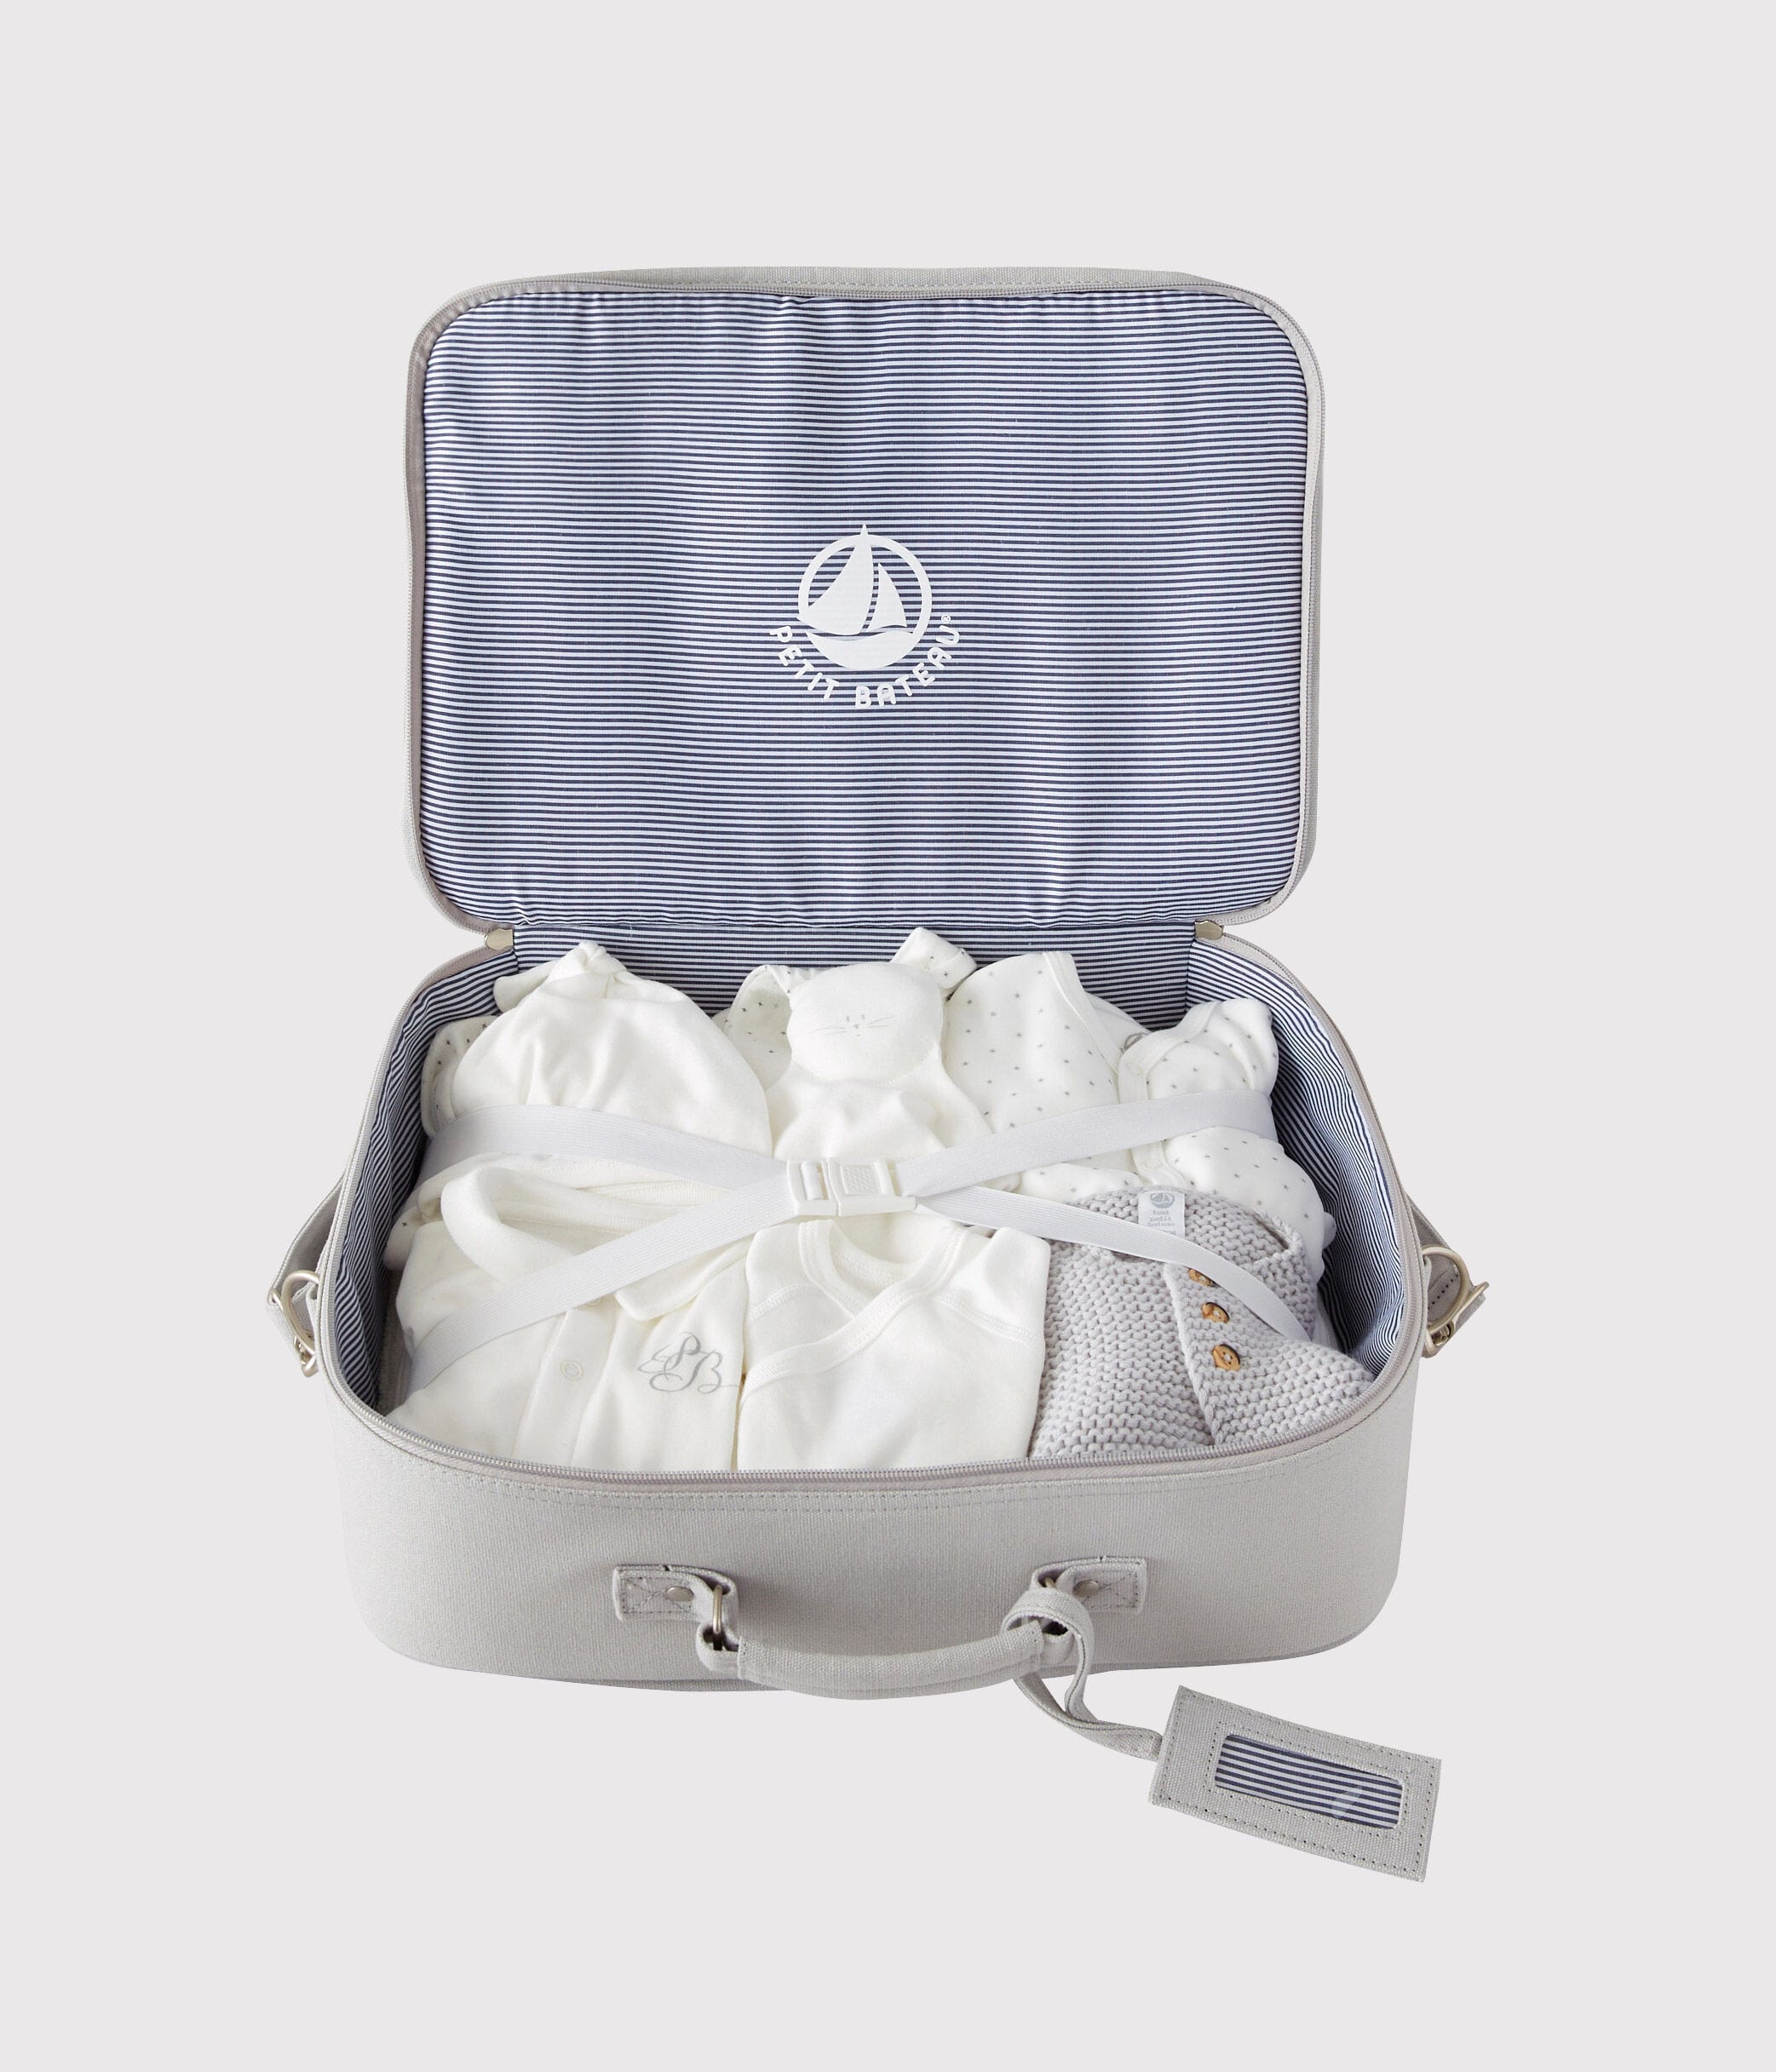 Purchase Valise Maternite Garcon Up To 76 Off